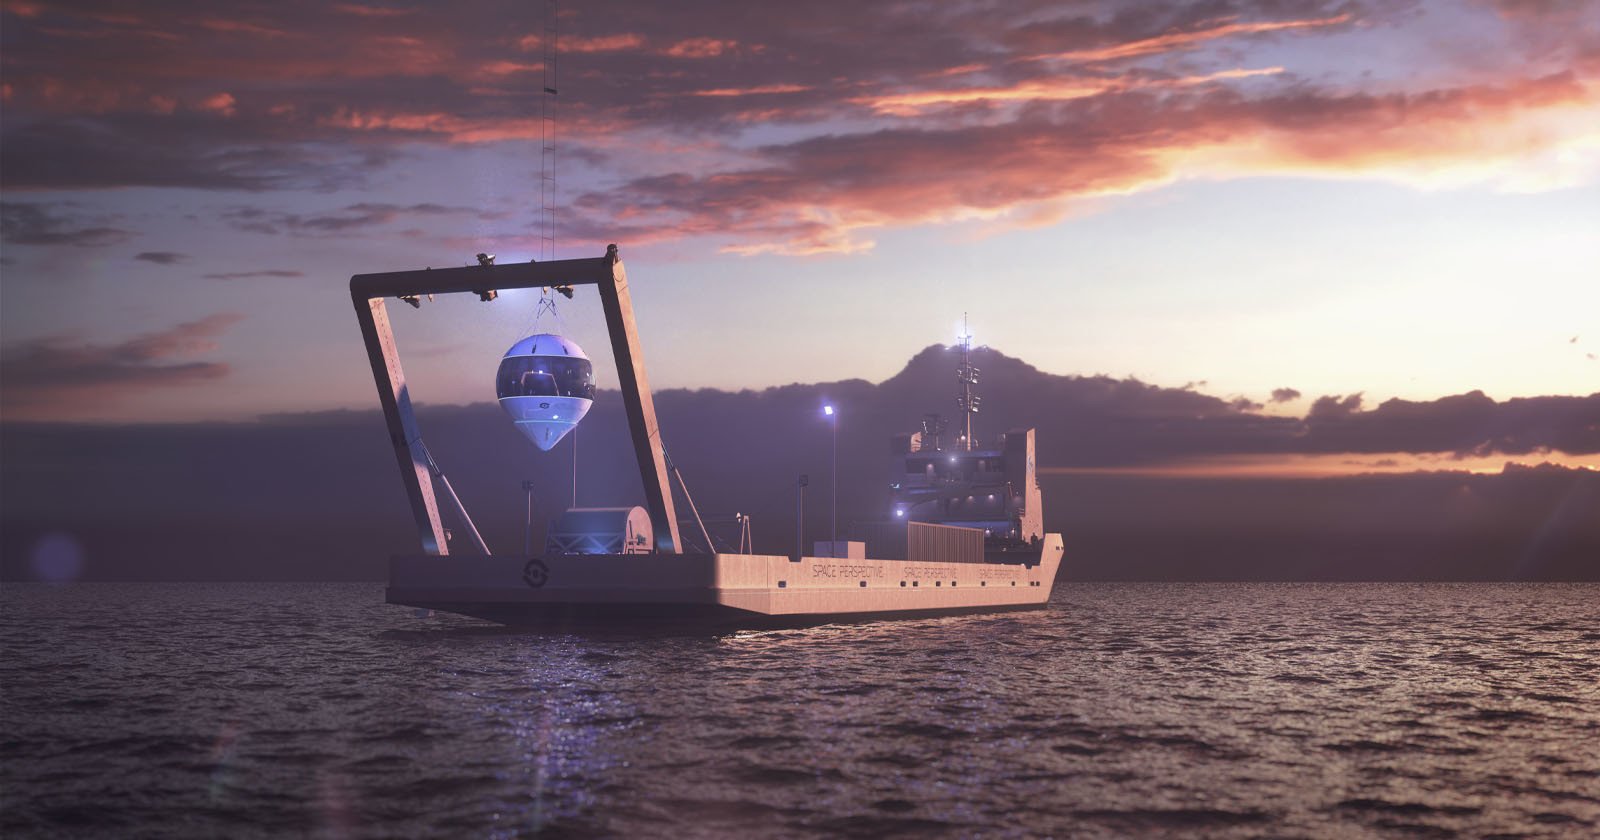 This is the Specialized Vessel That Will Launch Photo Tourism Space Pods